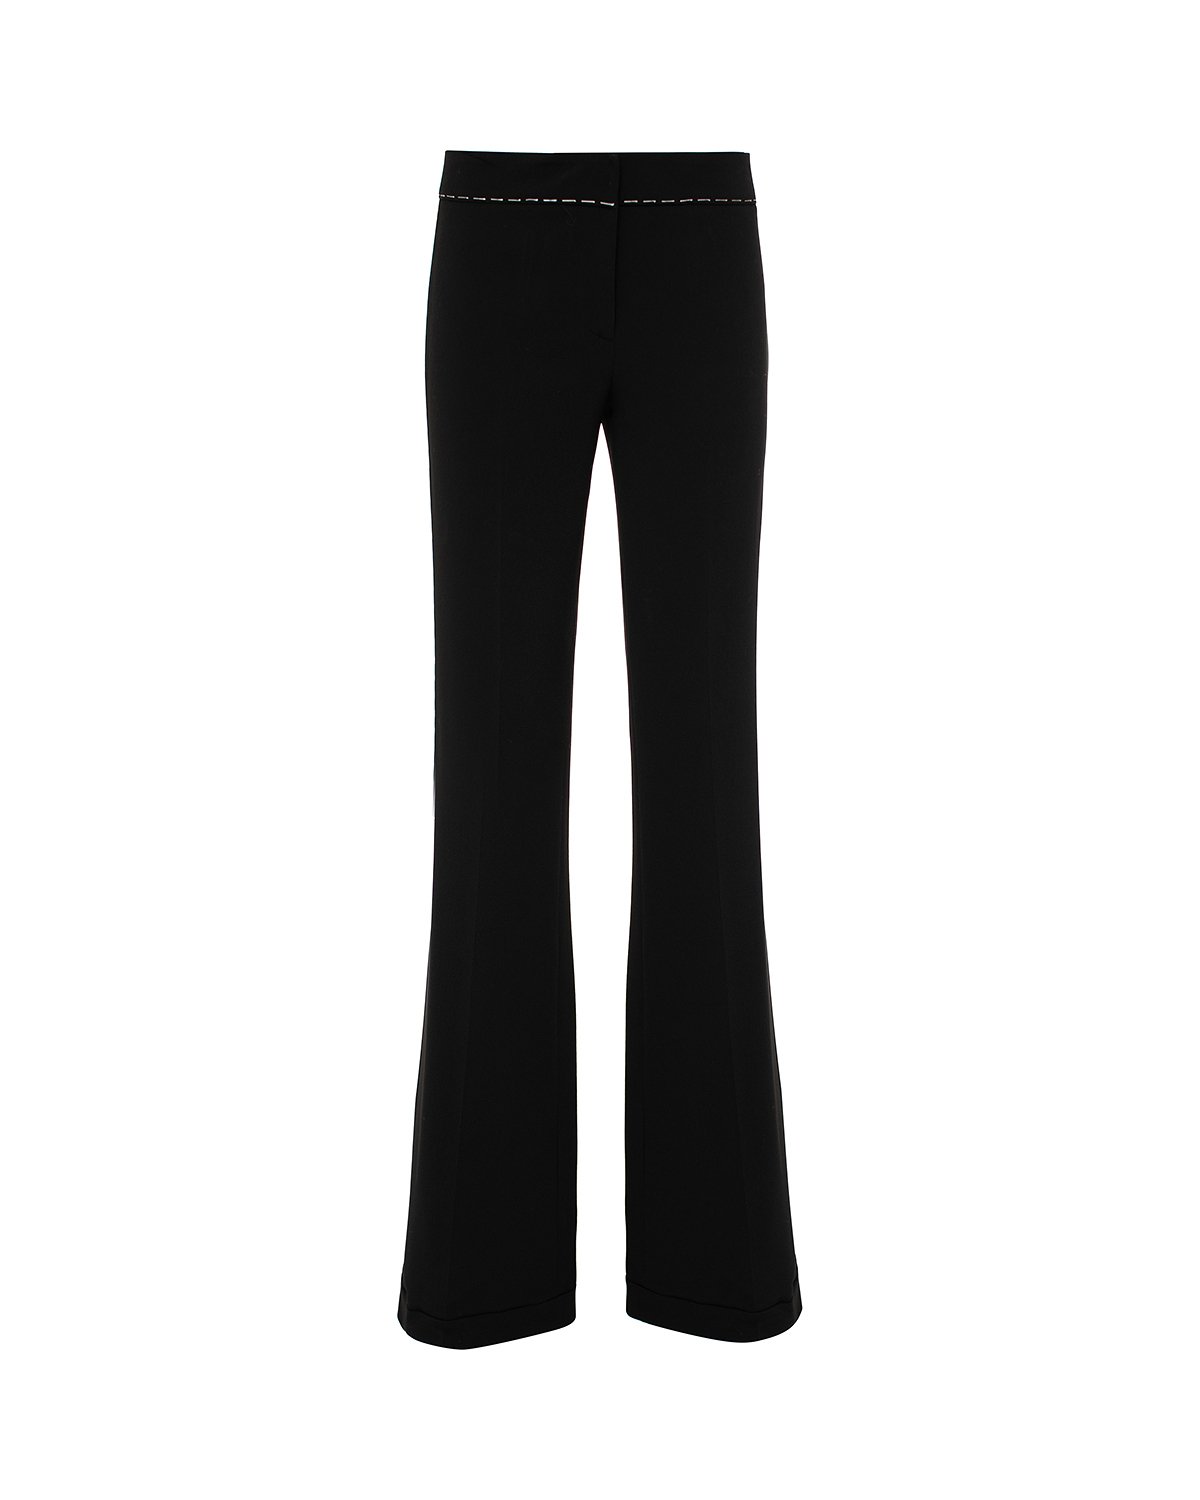 Flared trousers with basting stitching | Private sale | Genny